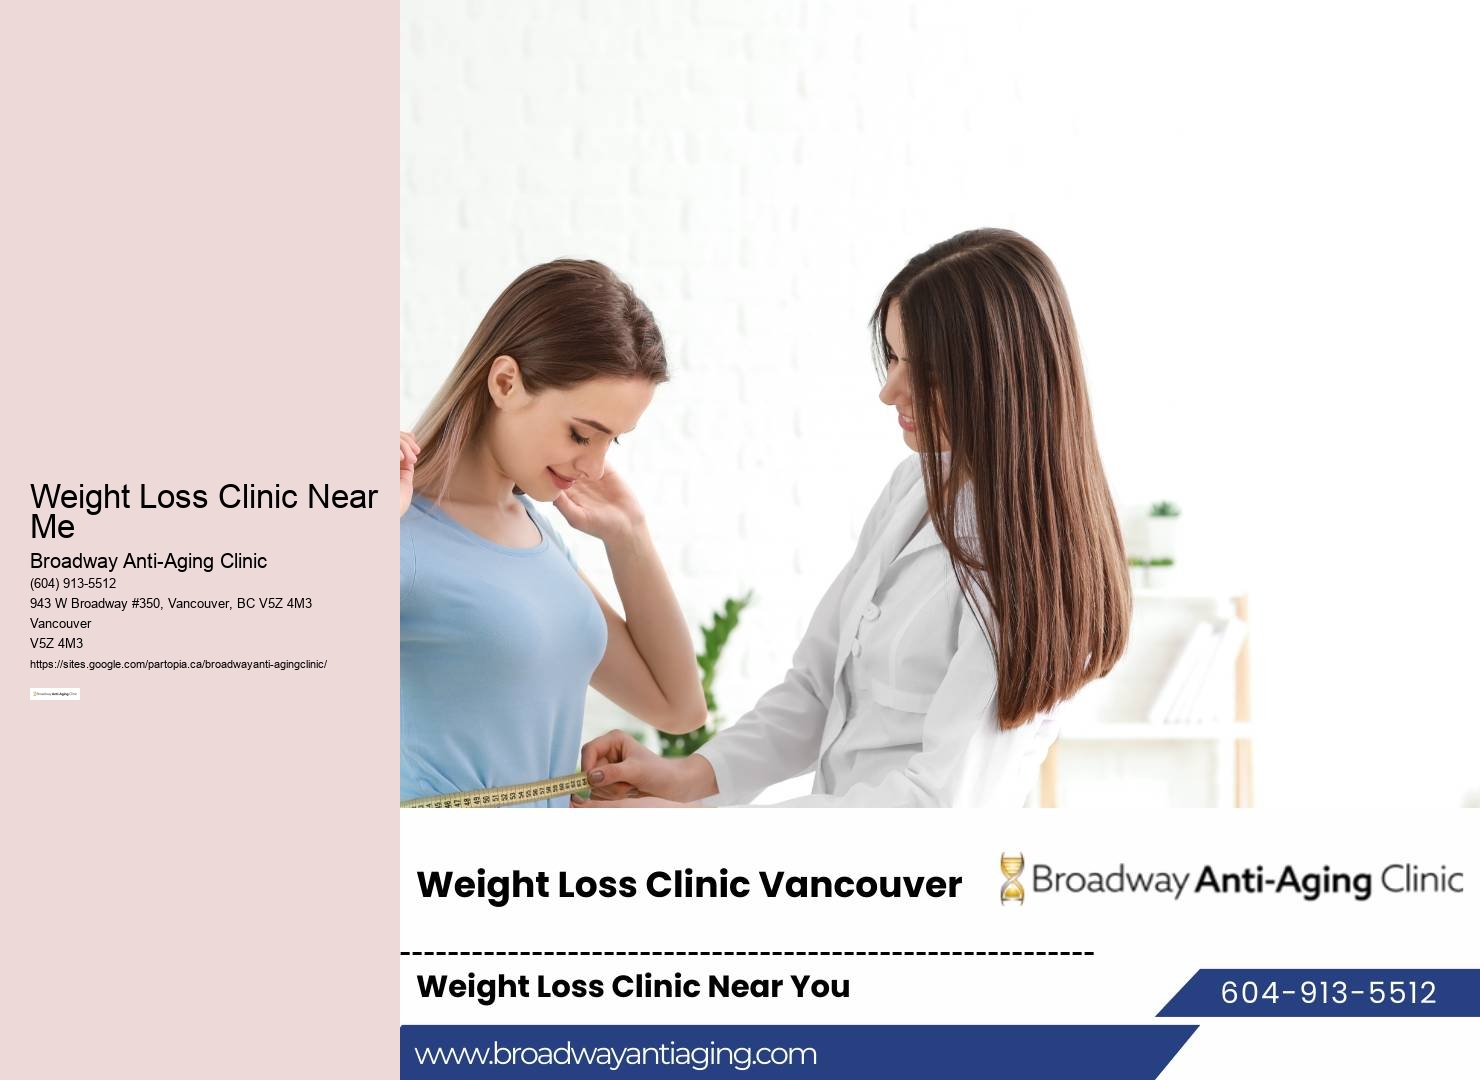 Revolution medical clinic Vancouver same day